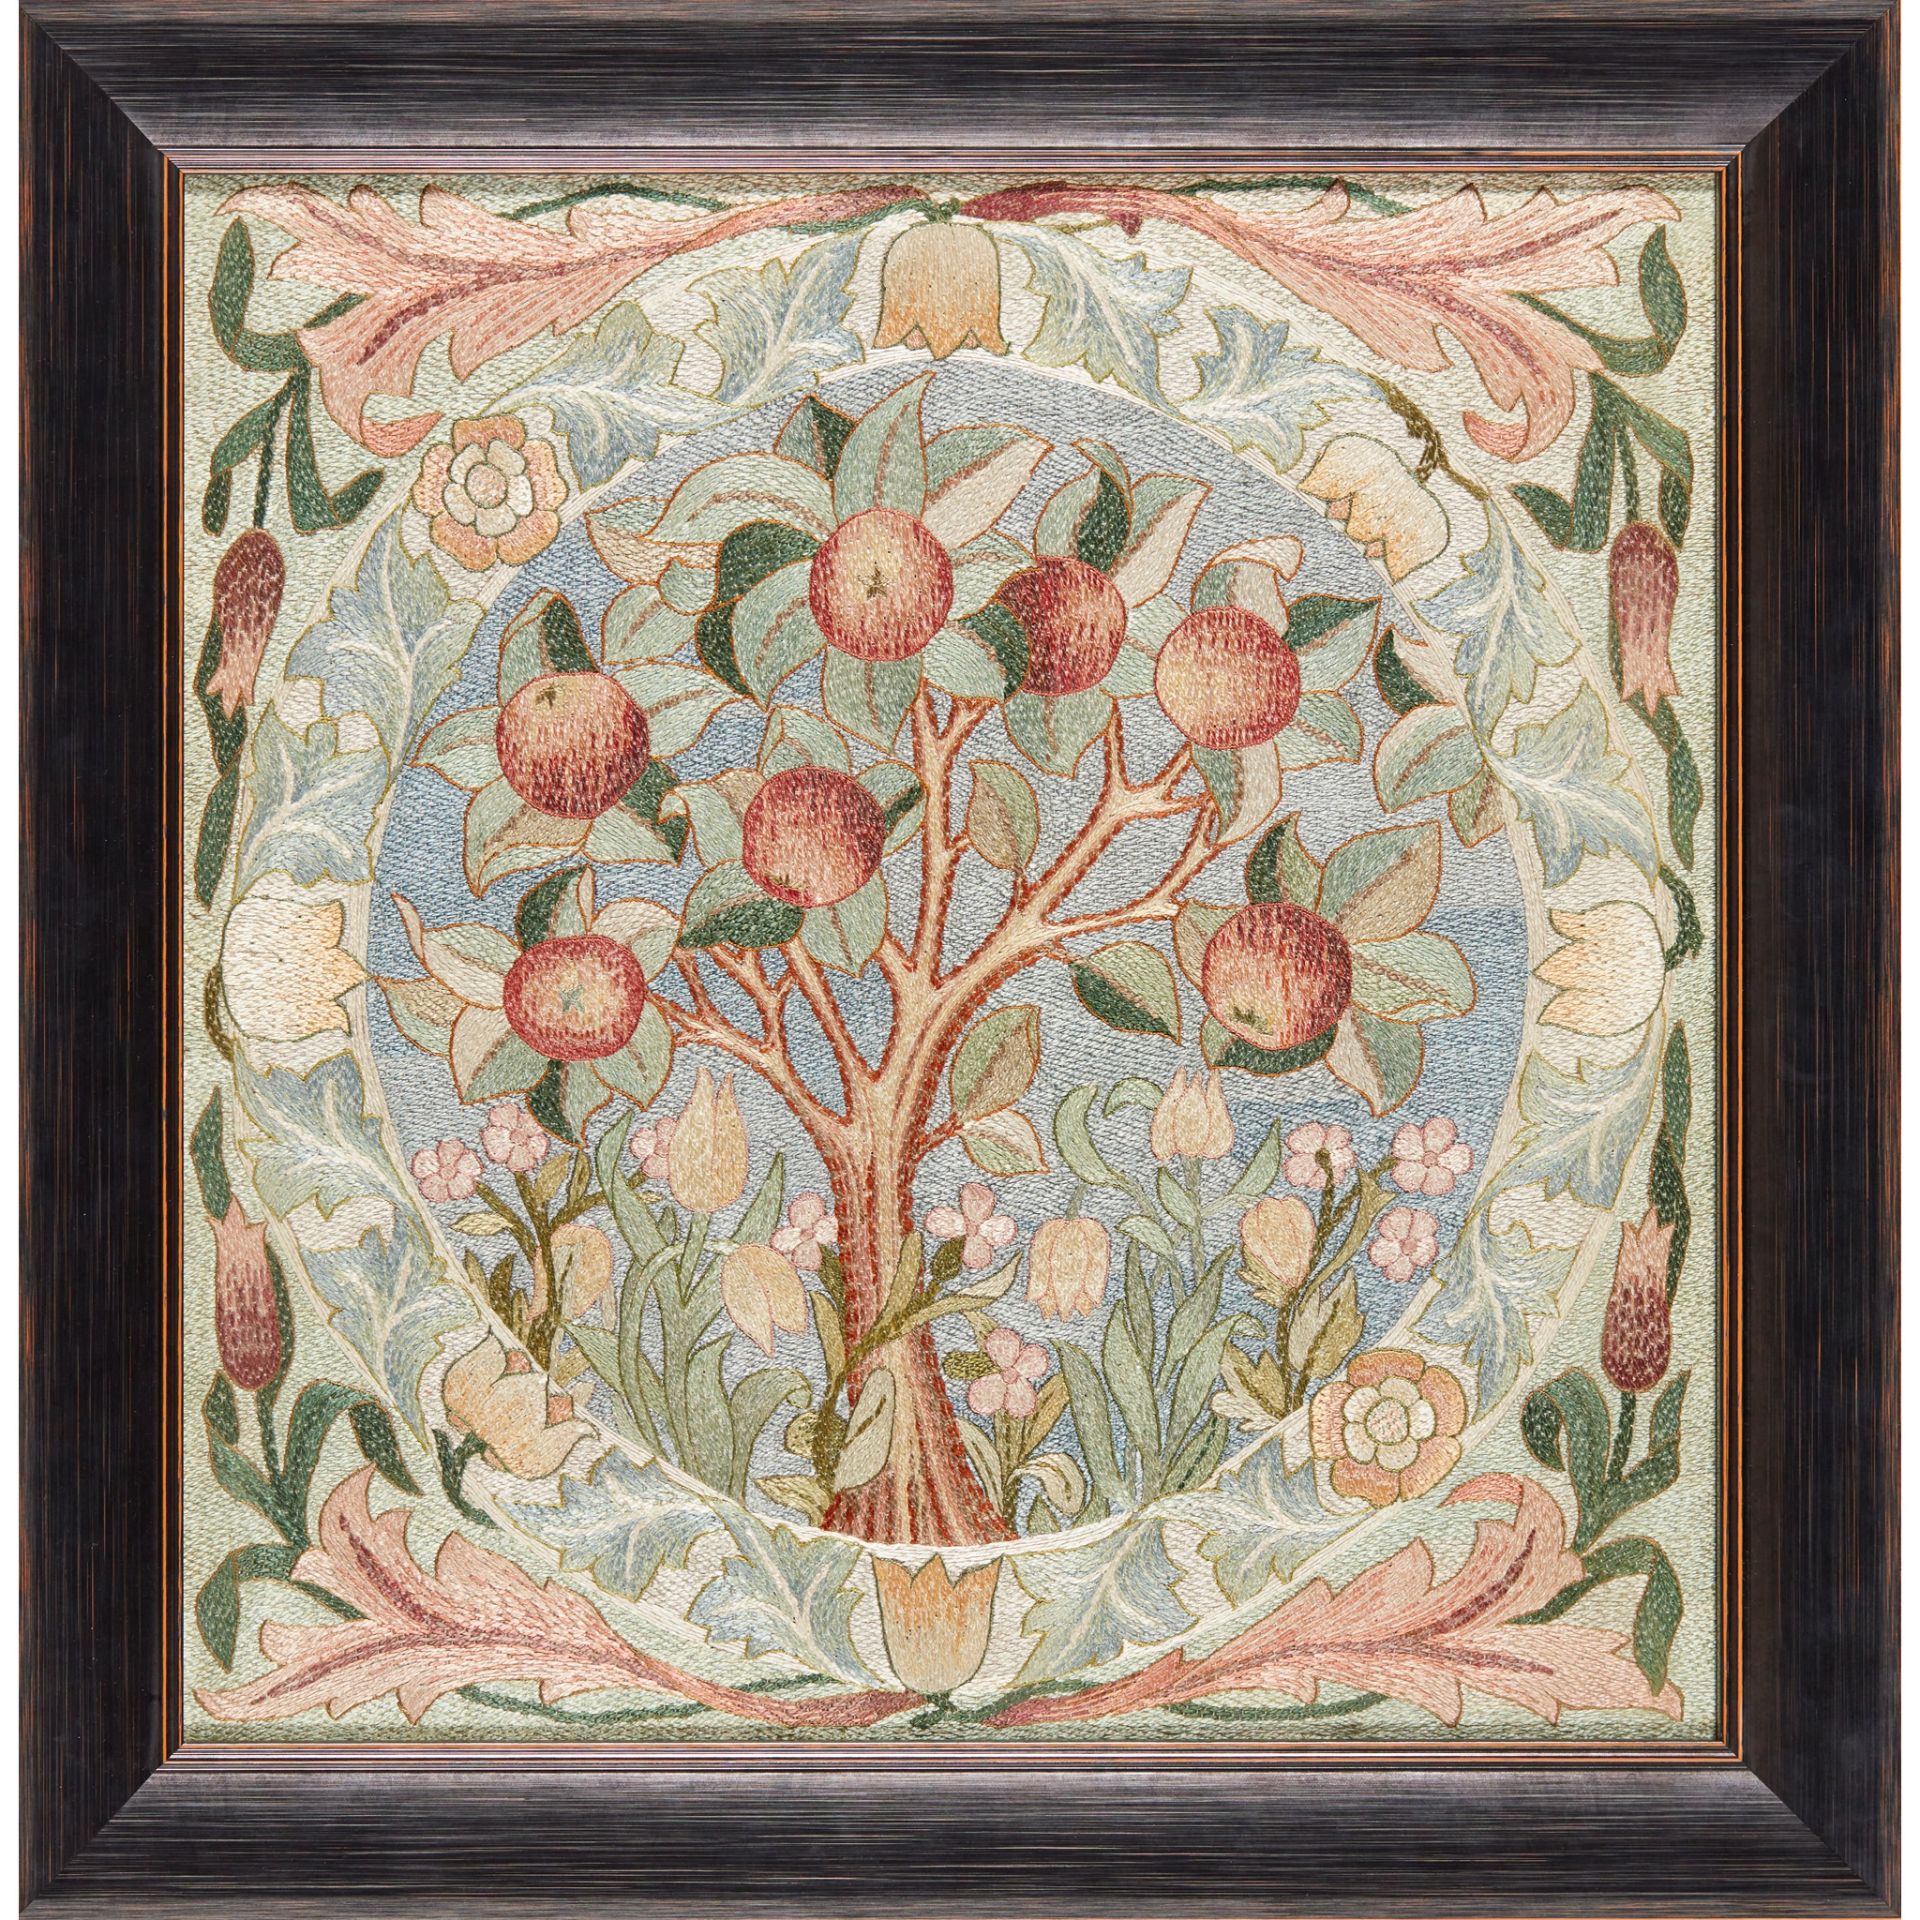 WILLIAM MORRIS (1834-1896) FOR MORRIS & CO. ‘THE APPLE TREE’ EMBROIDERED PANEL, CIRCA 1890 - Image 2 of 3